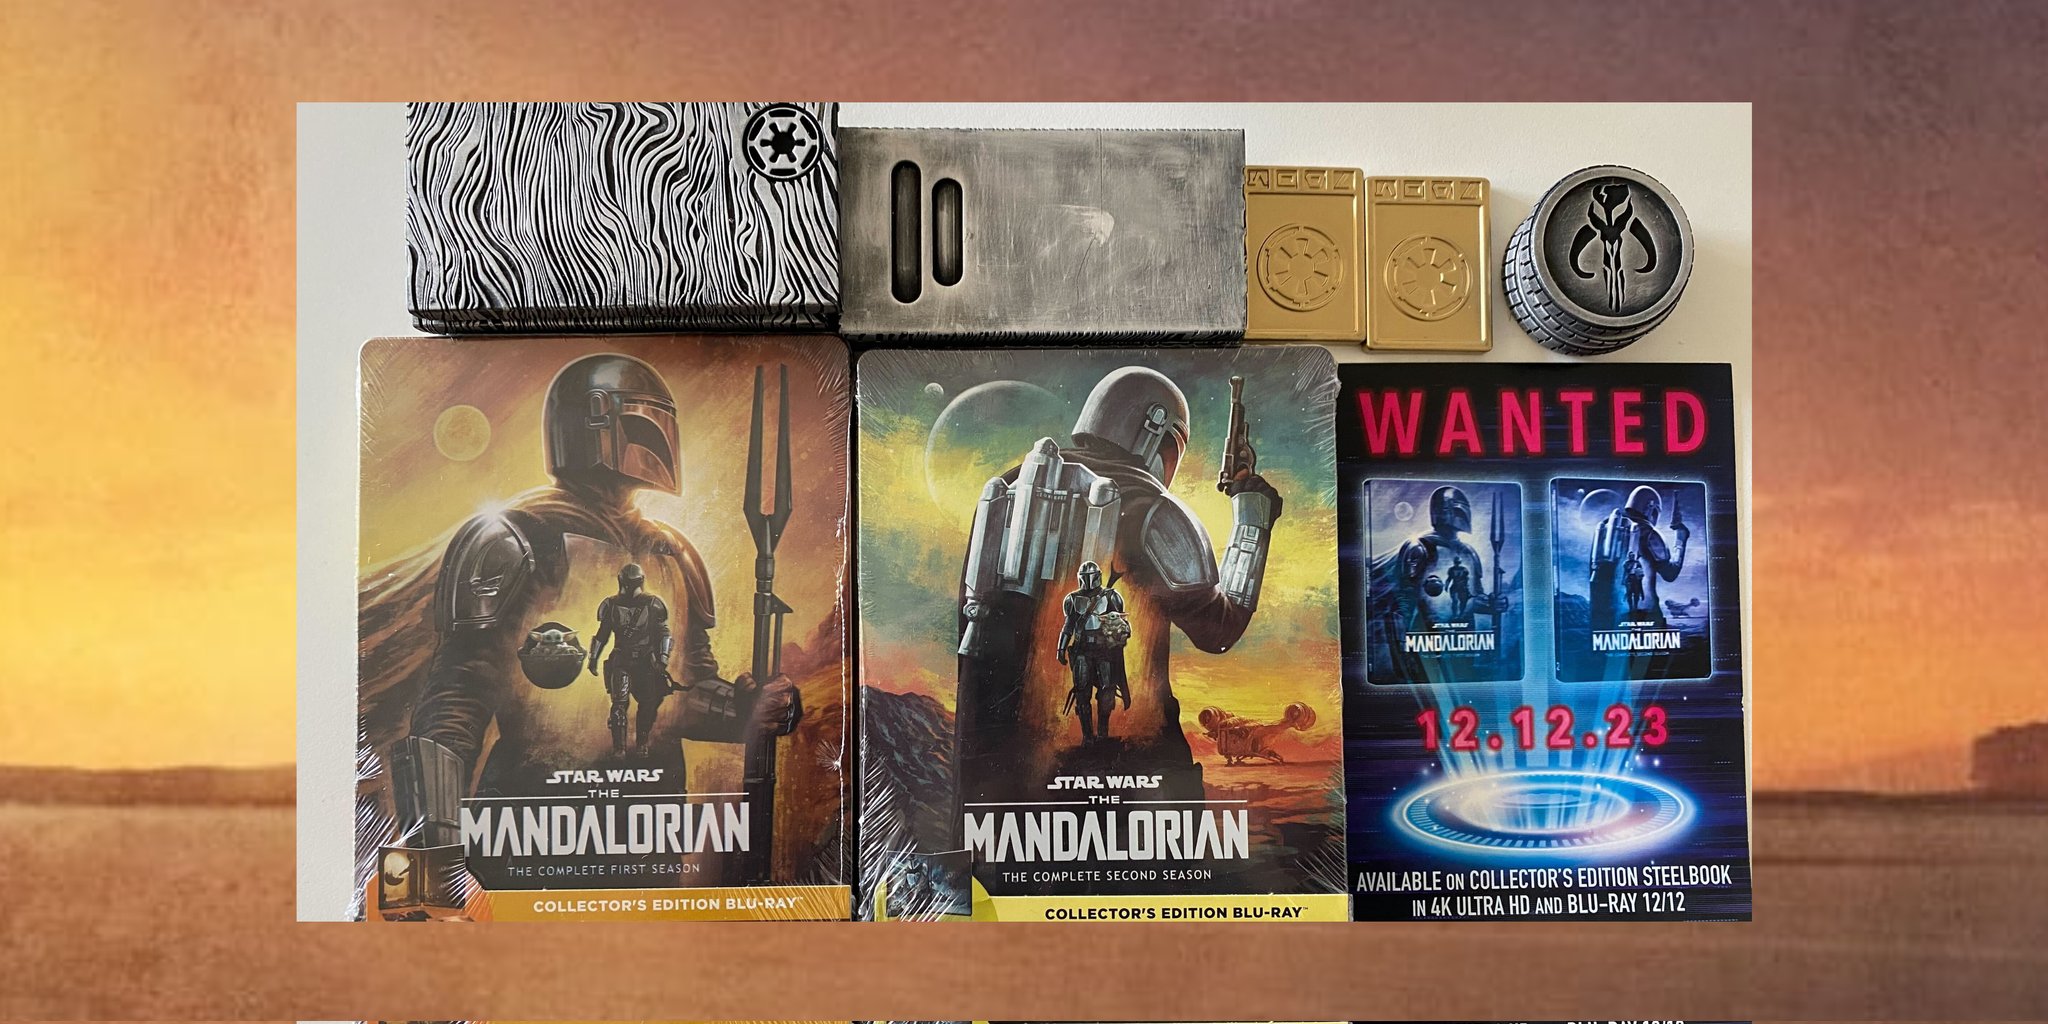 Movieweb on X: If you missed The Mandalorian's special 4K UHD steelbook  and Blu-ray home release of seasons one and two on 12/12, it's the perfect  thing to spend your holiday gift